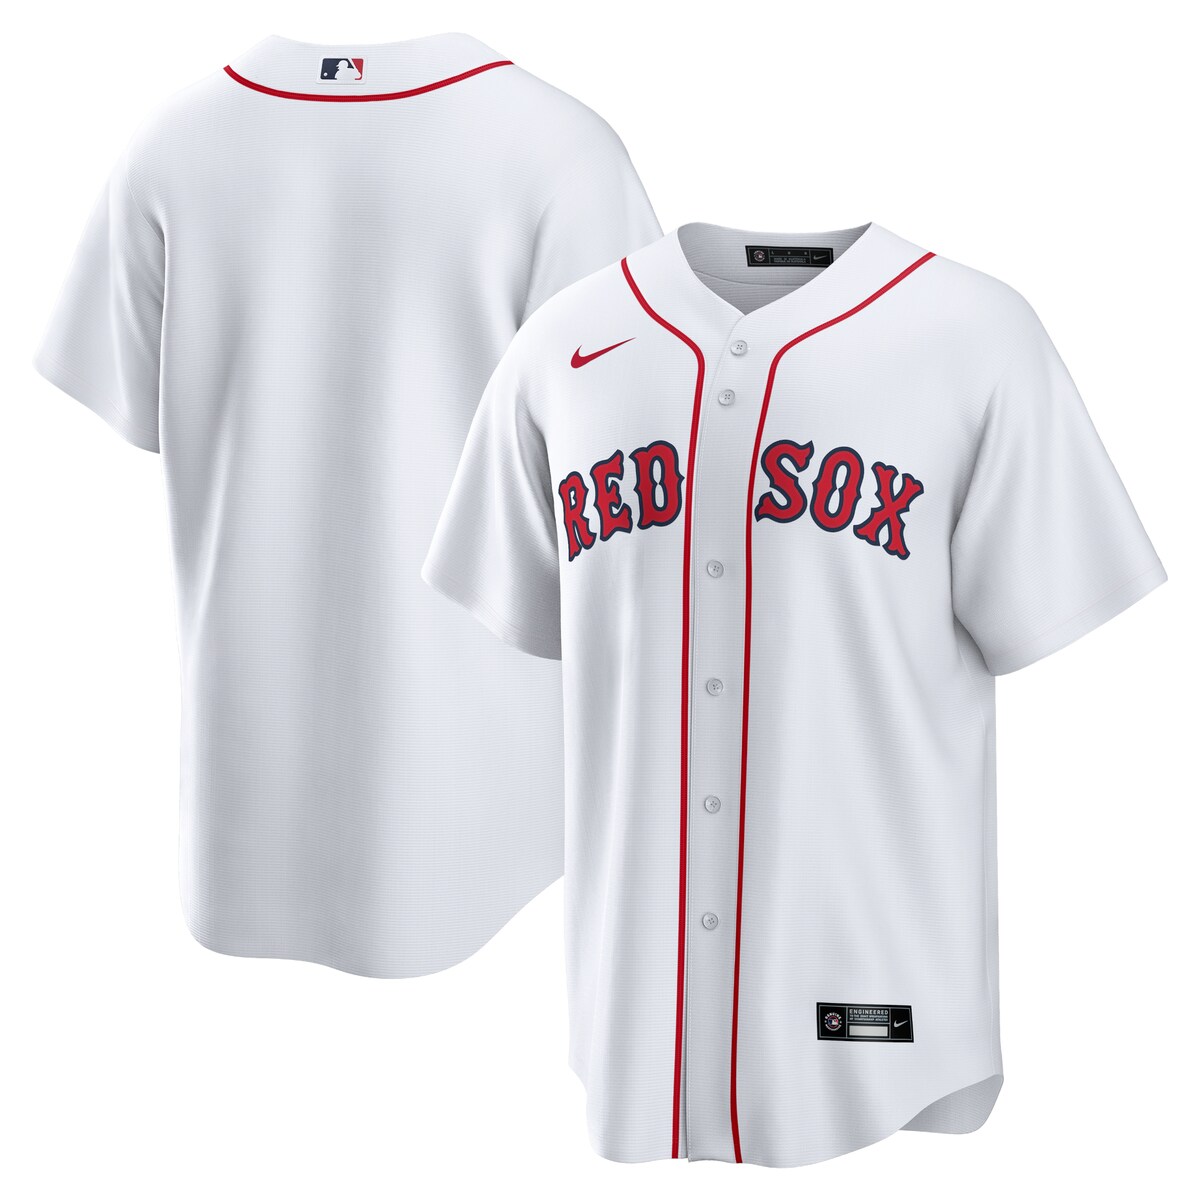 As the ultimate Boston Red Sox fan, you deserve the same look that your favorite players sport out on the field. This Home Replica Team jersey from Nike brings the team's official design to your wardrobe for a consistently spirited look on game day. The polyester material and slick Boston Red Sox graphics are just what any fan needs to look and feel their best.Heat-sealed jock tagOfficially licensedHeat-sealed transfer appliqueMachine wash gentle or dry clean. Tumble dry low, hang dry preferred.Jersey Color Style: HomeFull-button frontRounded hemImportedMaterial: 100% PolyesterShort sleeveMLB Batterman applique on center back neckBrand: NikeReplica